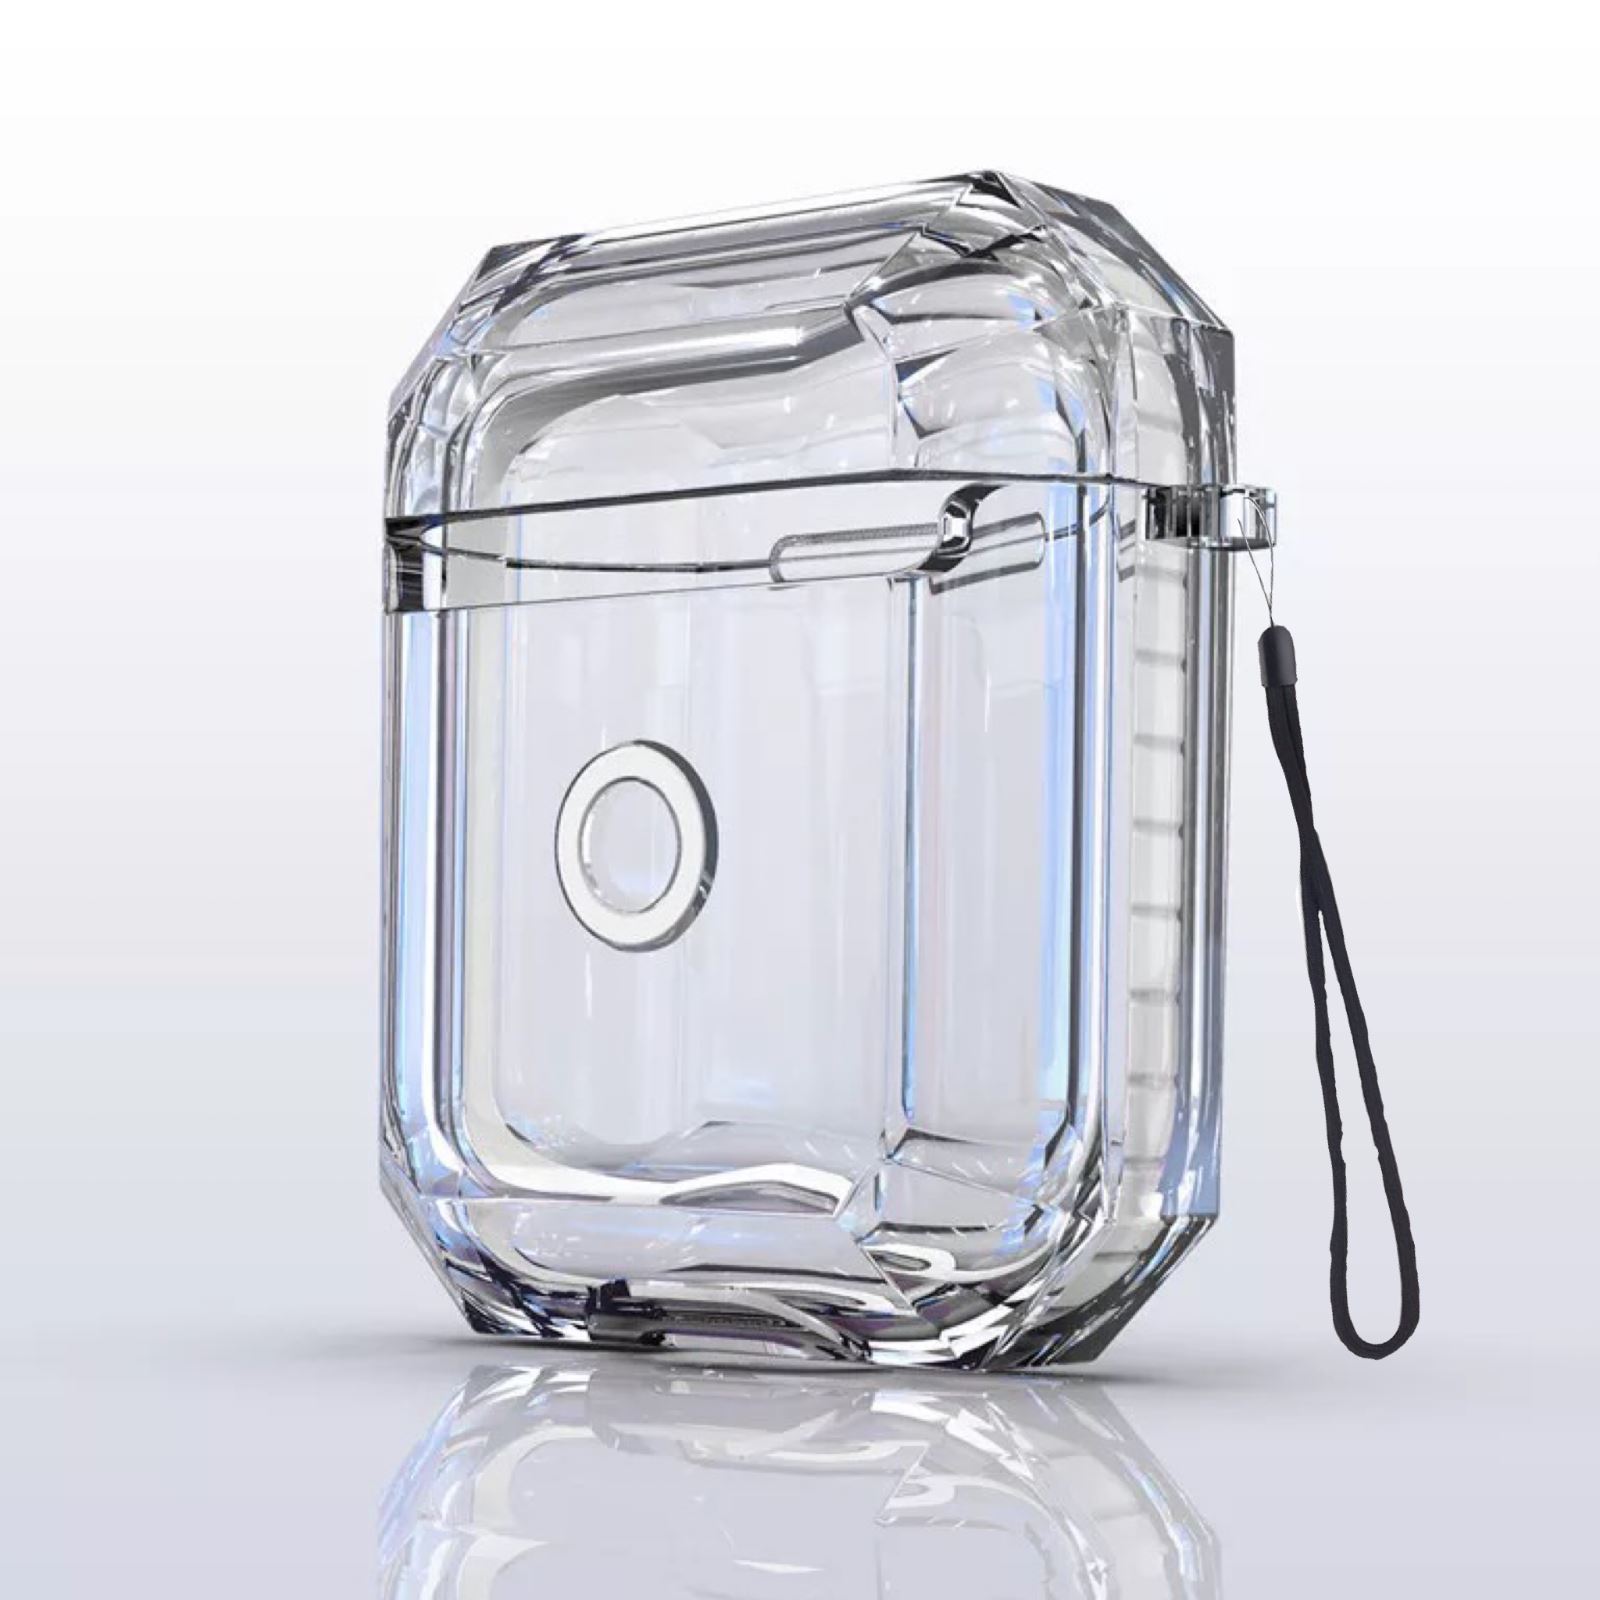 AirPods Clear Protective Case Cover Transparent For Airpod Charging Case 1/2 Gen i-mobix White 2nd Gen 